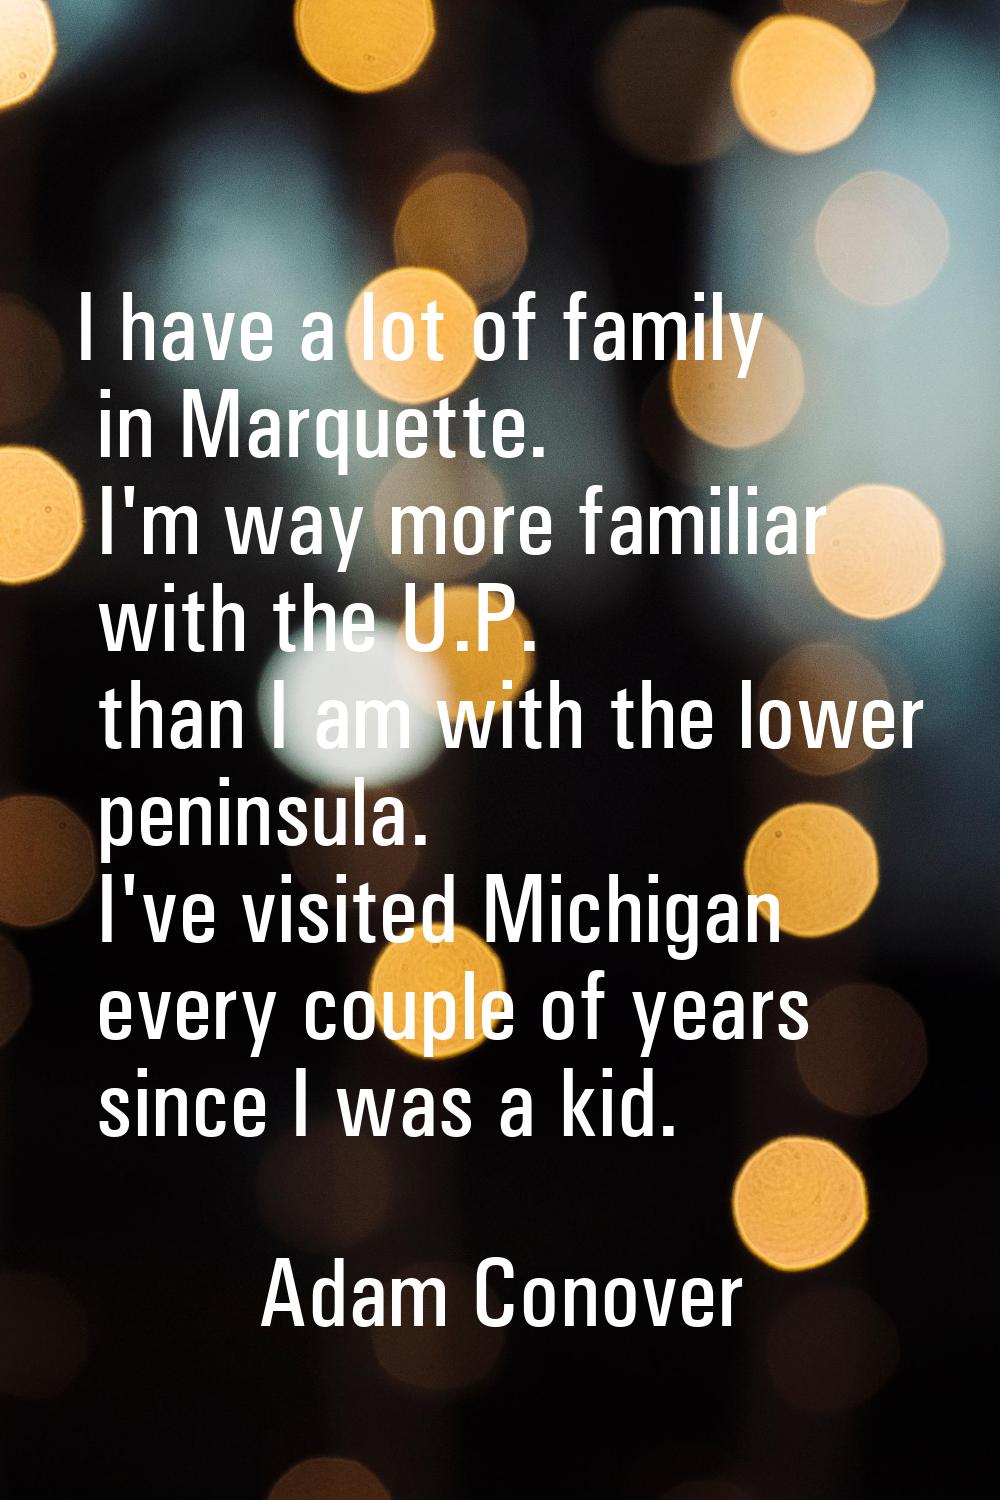 I have a lot of family in Marquette. I'm way more familiar with the U.P. than I am with the lower p